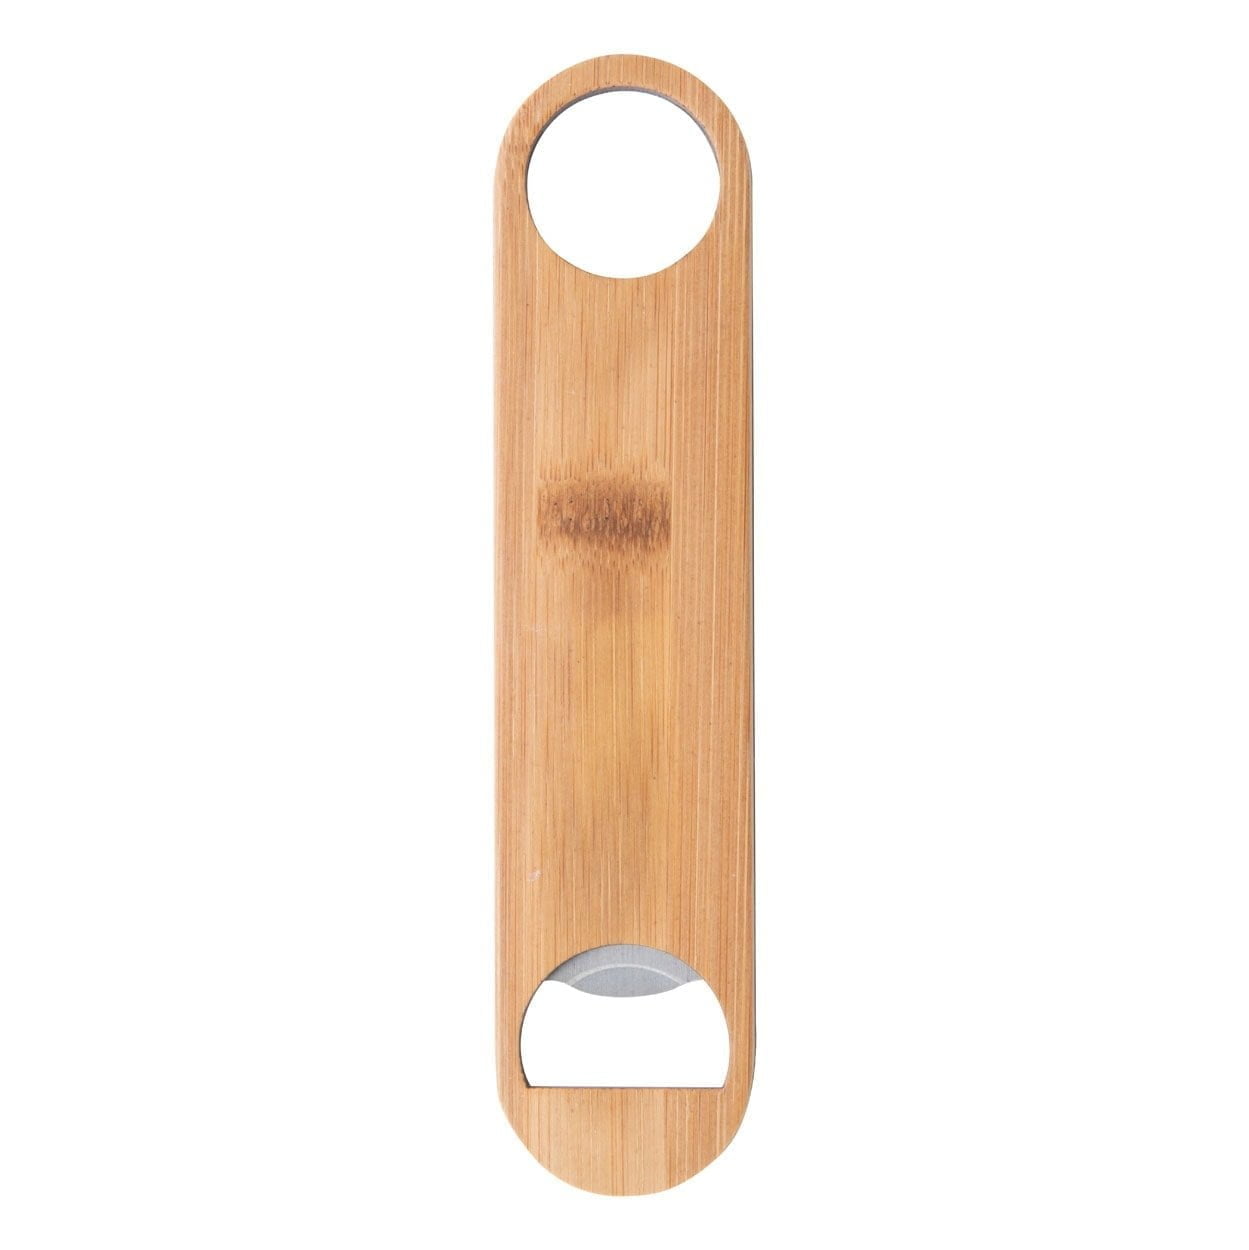 Home & Living Boojito bottle opener